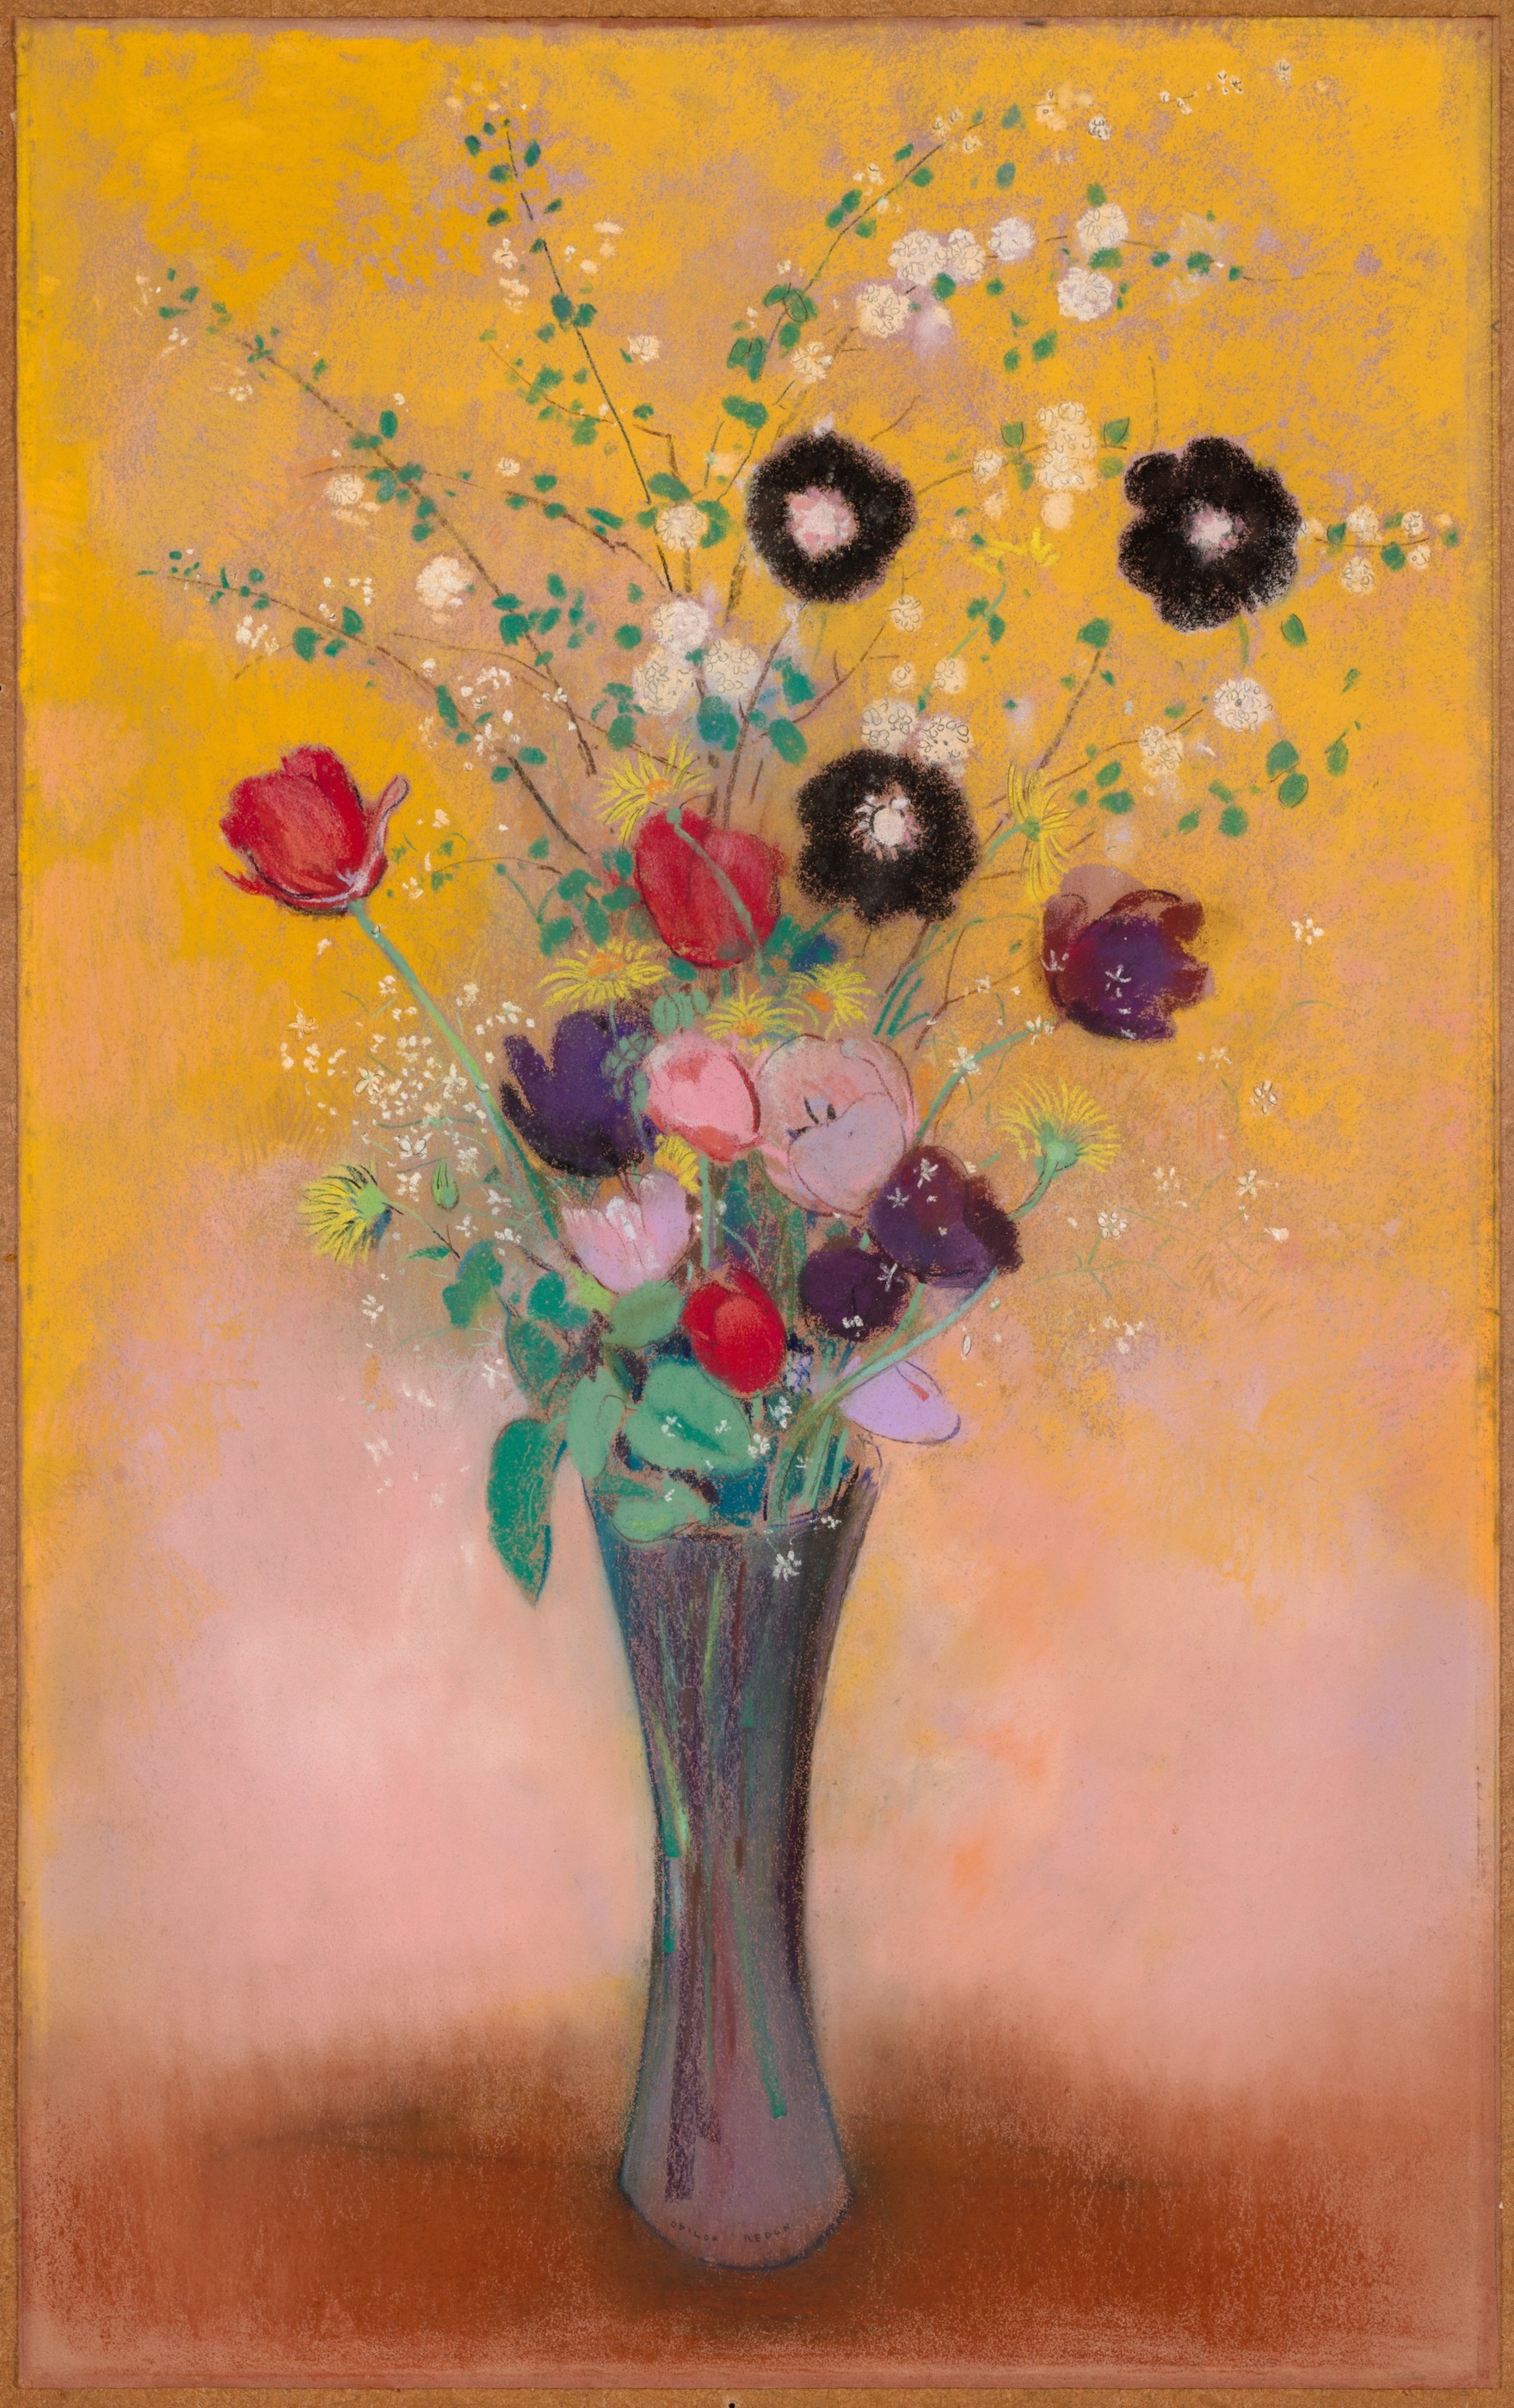 Vase of Flowers by Odilon Redon - 1916 - 84.1 x 58 cm Cleveland Museum of Art